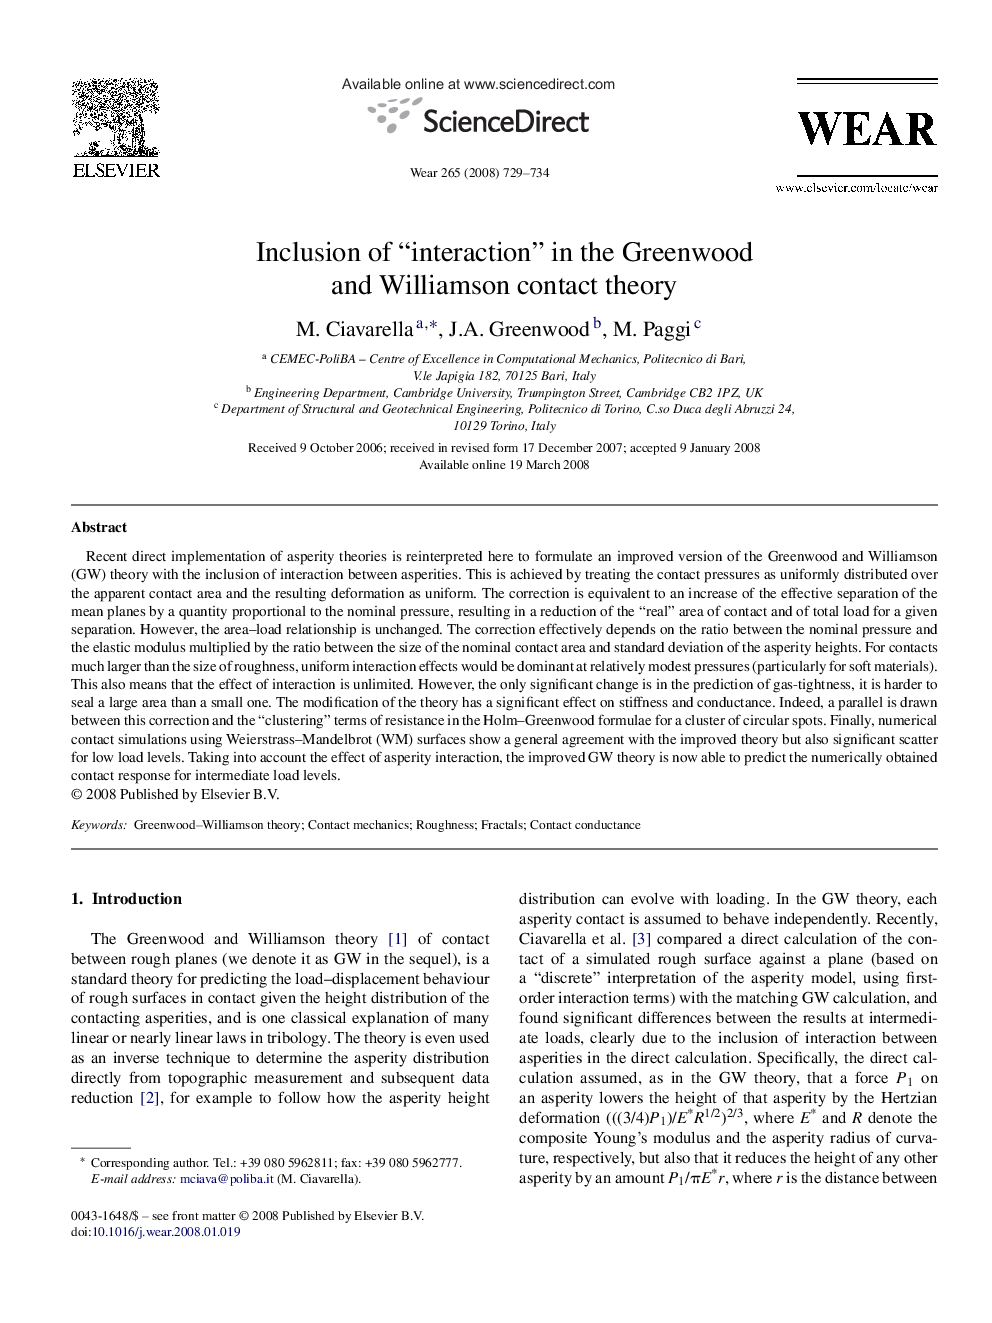 Inclusion of “interaction” in the Greenwood and Williamson contact theory